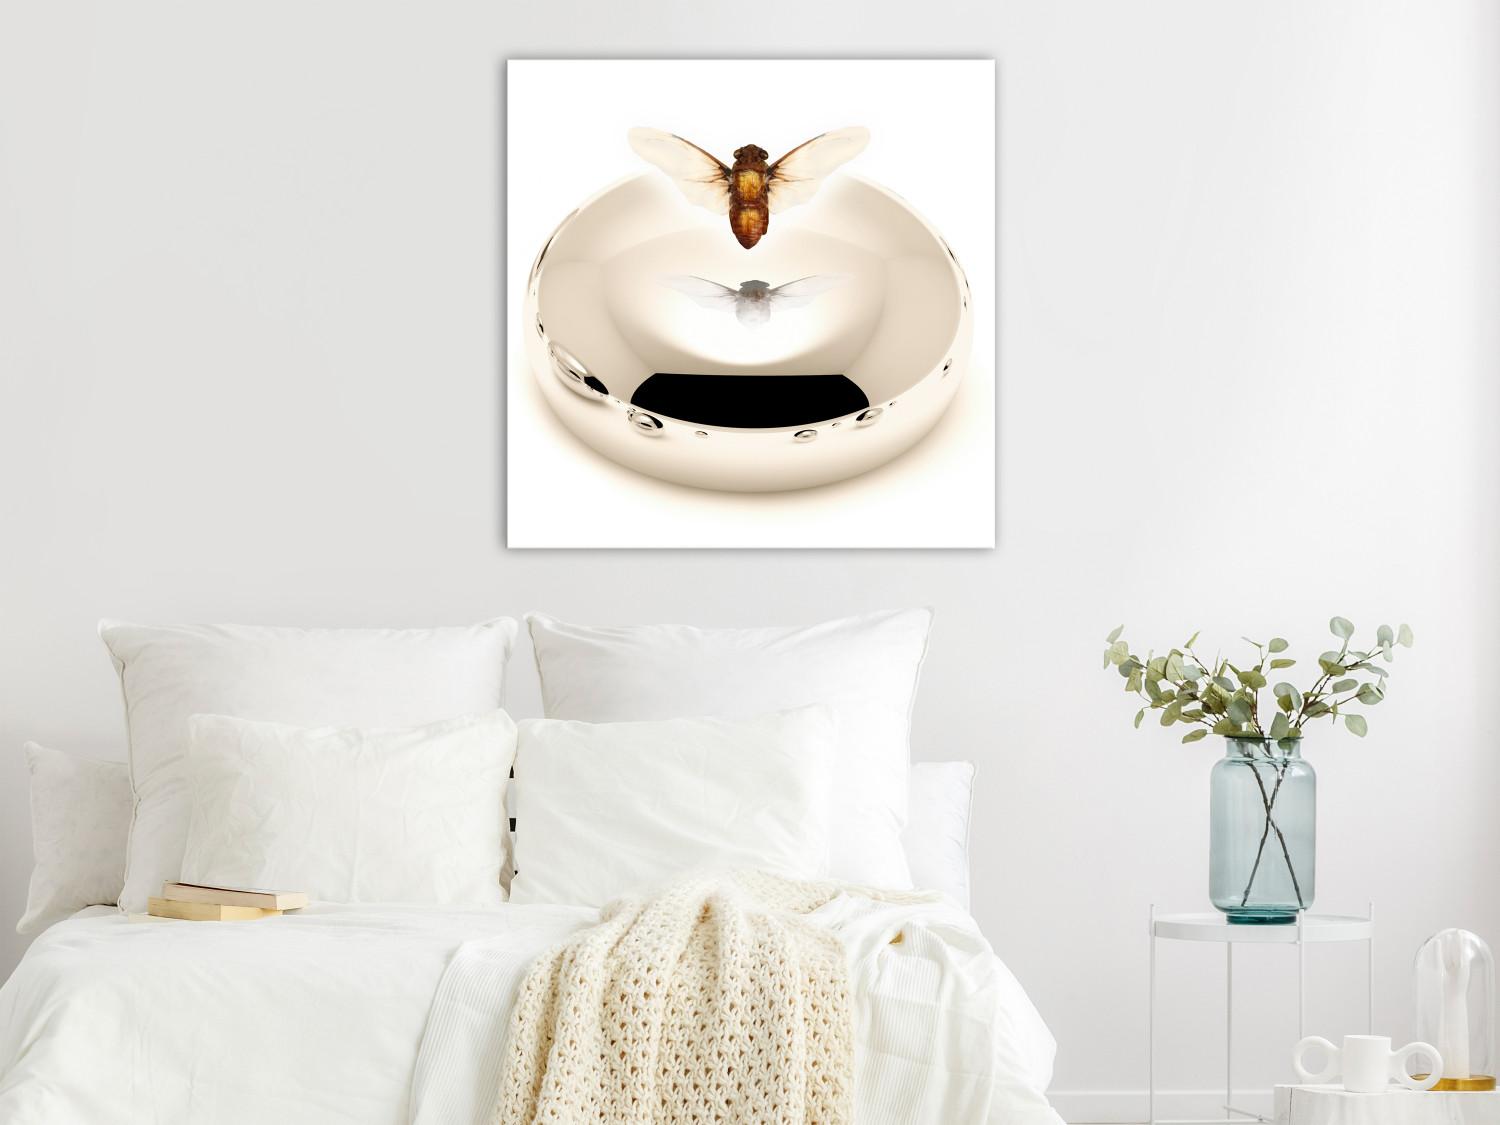 Canvas Released from amber - abstract gold 3D motif with an insect